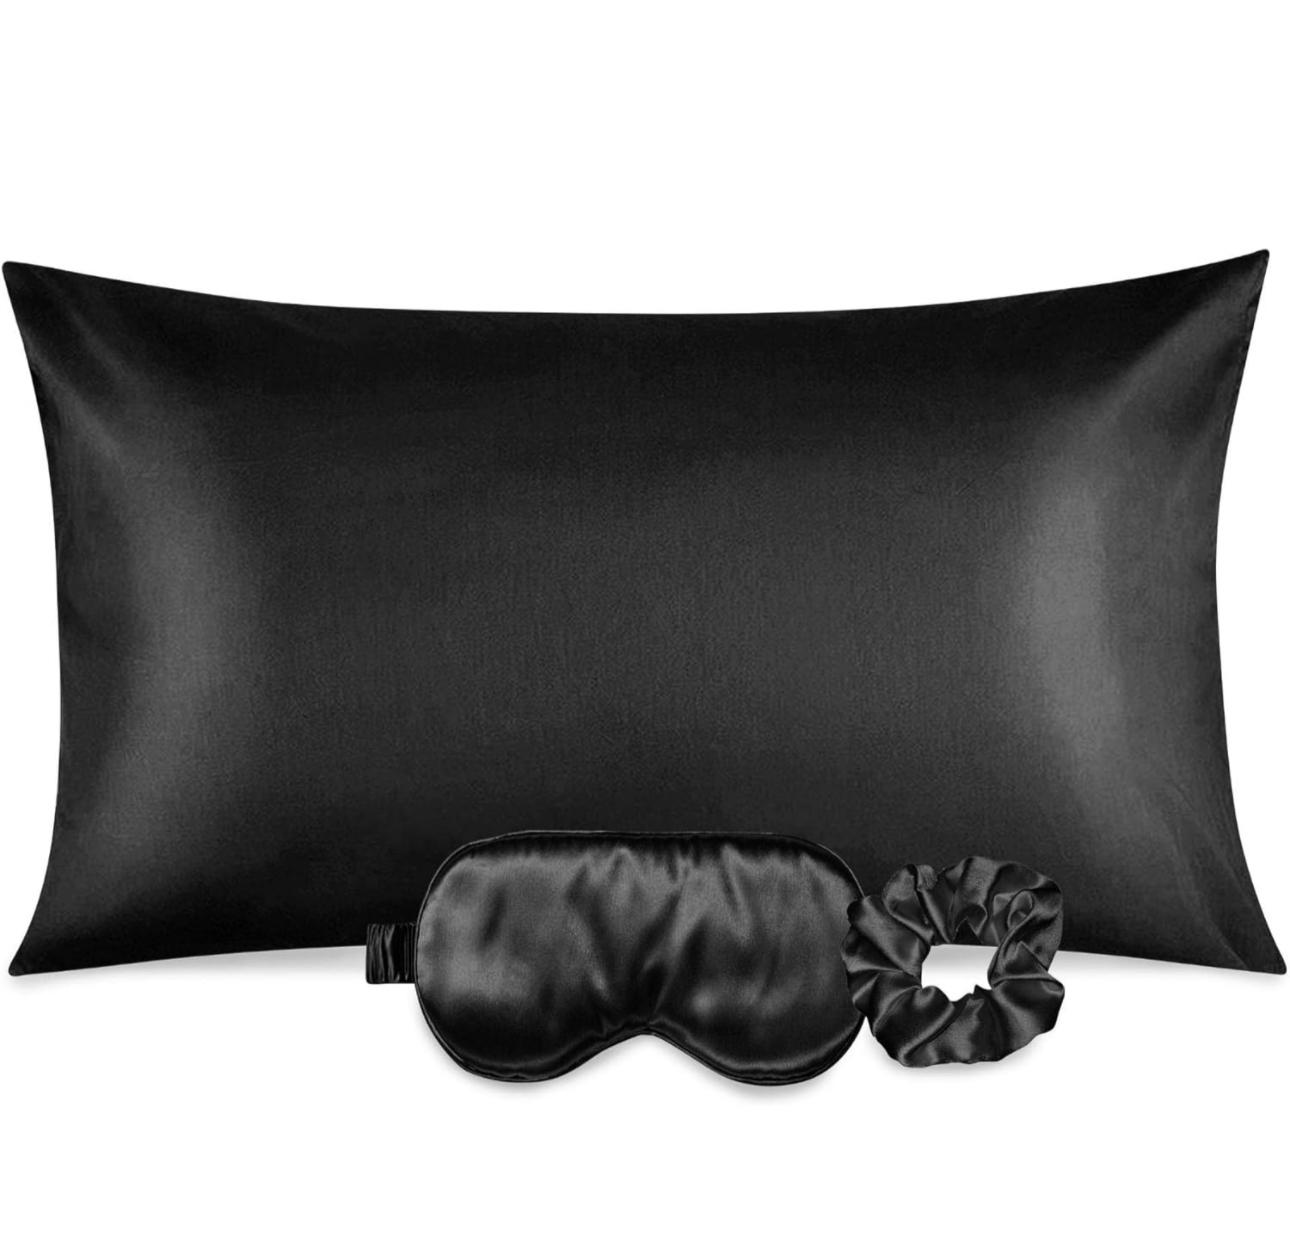 Silk Black Pillow Set with Eye Mask and Scrunchie